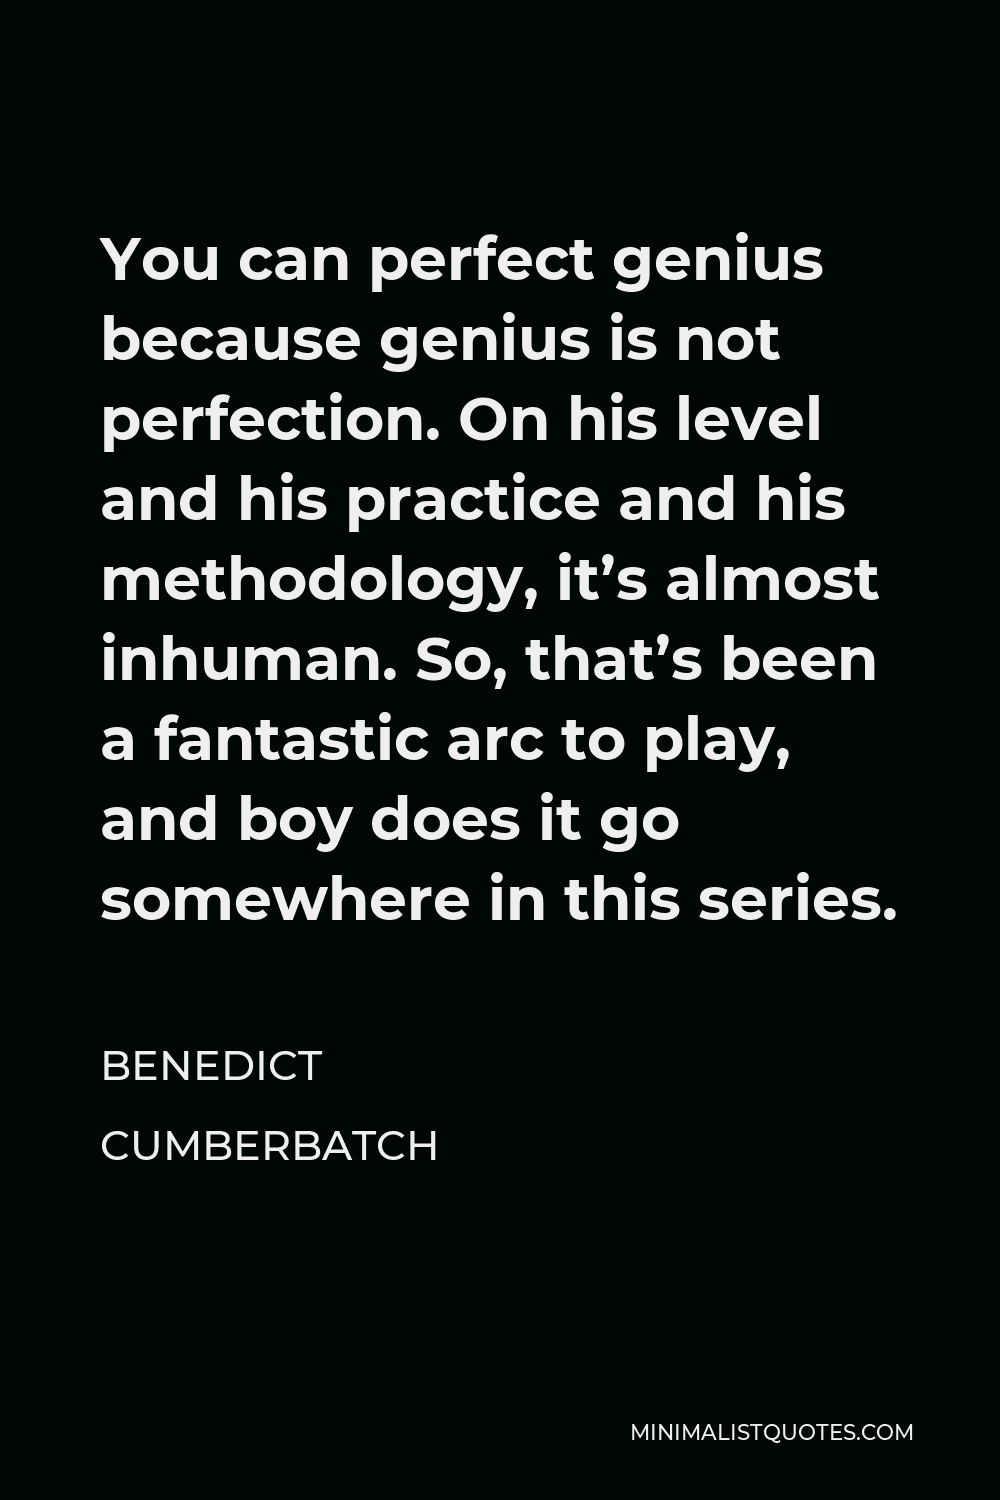 Benedict Cumberbatch Quote - You can perfect genius because genius is not perfection. On his level and his practice and his methodology, it’s almost inhuman. So, that’s been a fantastic arc to play, and boy does it go somewhere in this series.